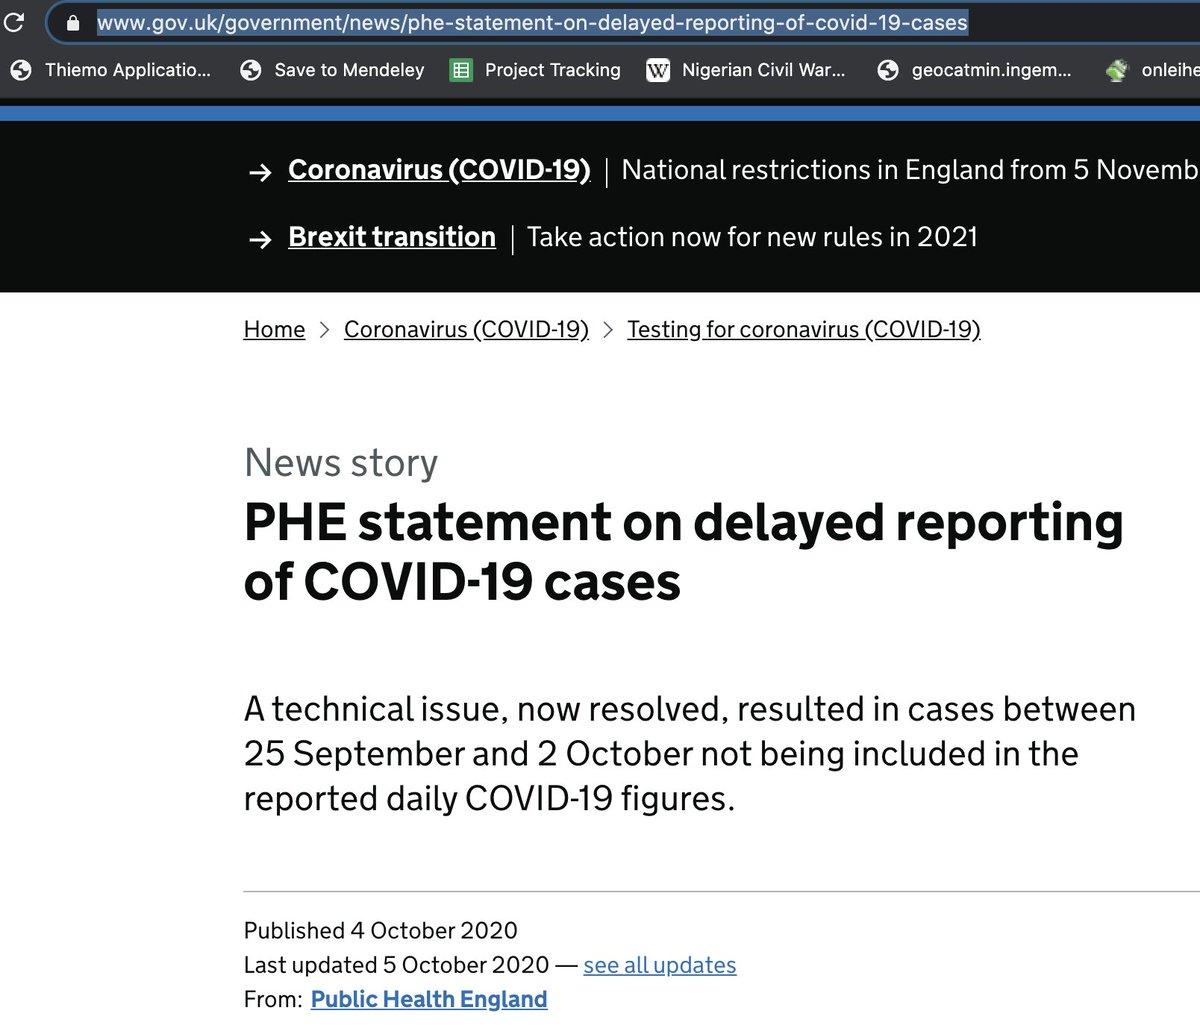 Enter the English Test&Trace system hastily built on, what appears to be a set of XLS spreadsheets giving us a consequential natural experiment. On Oct 4, PHE announced that ~ 16k  #COVID19 cases were not correctly reported resulting in a large jump in reported cases.. 3/N